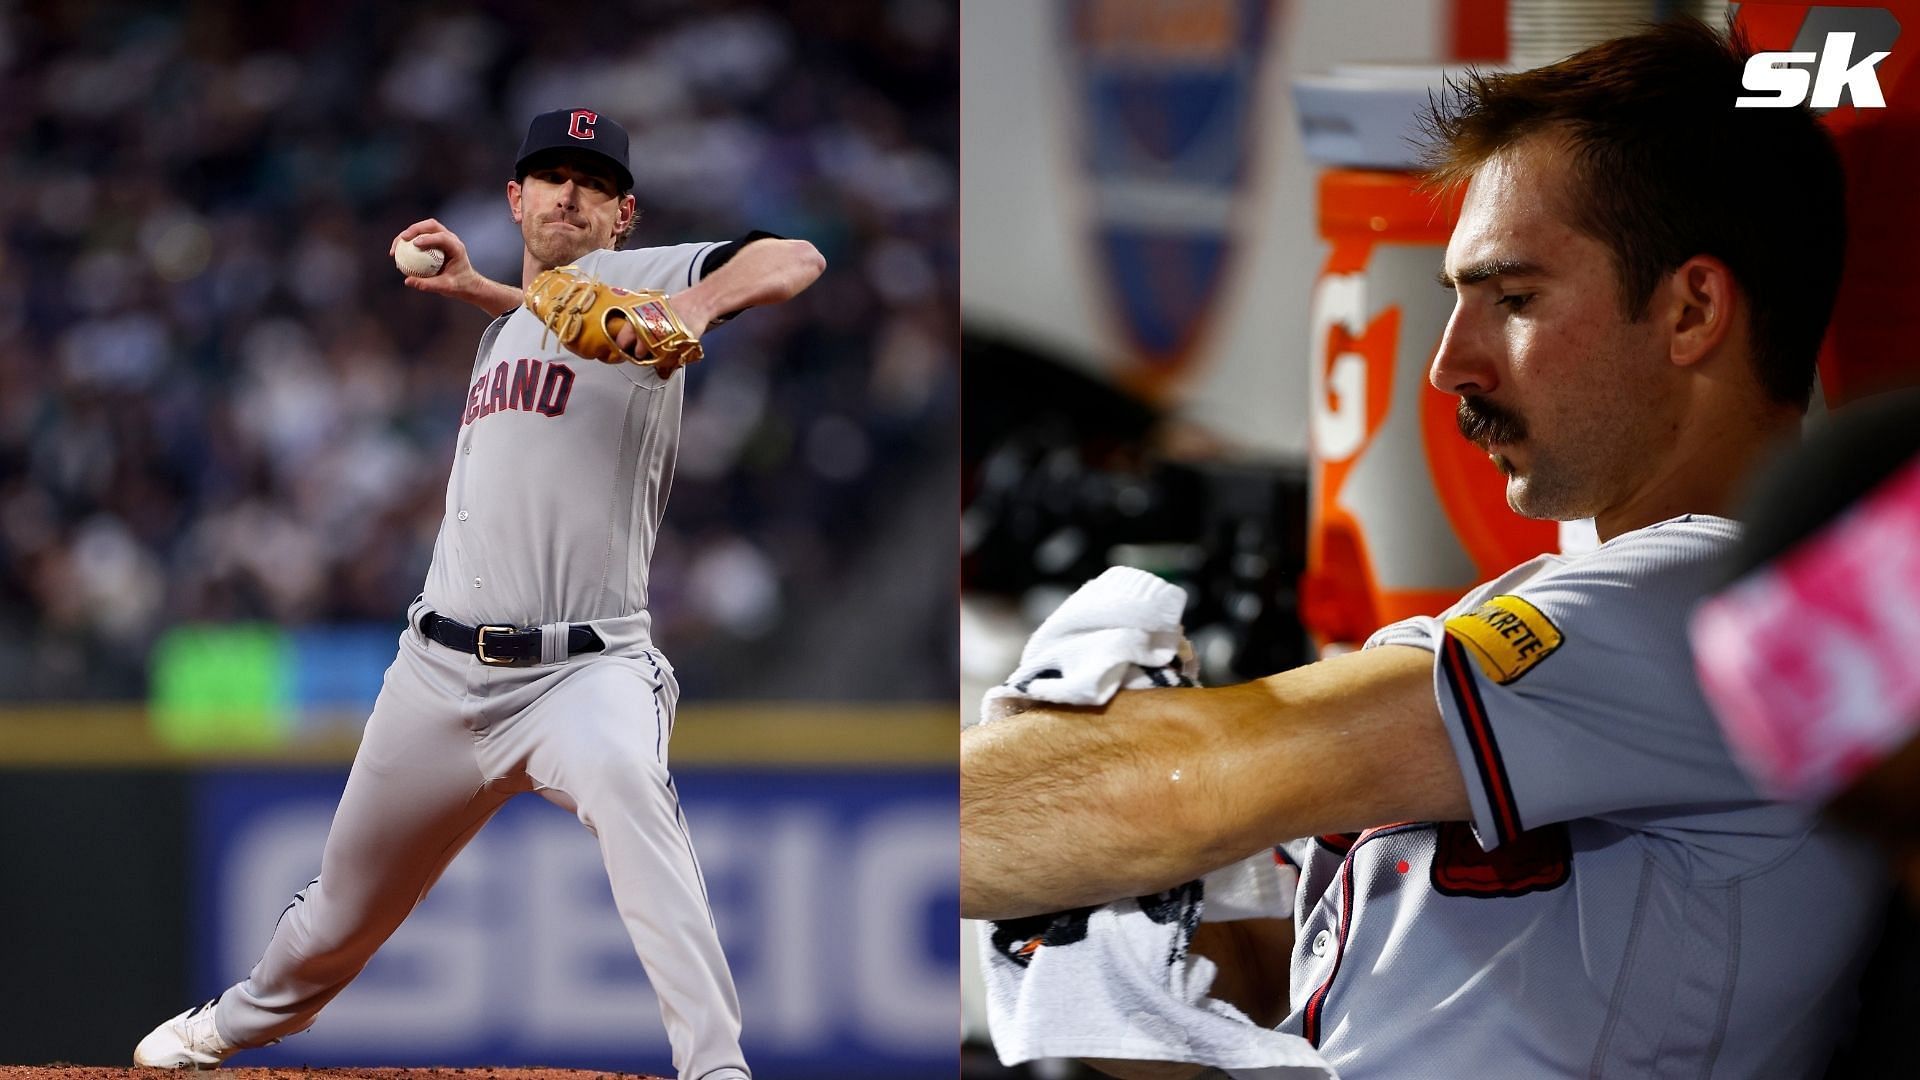 Some top MLB pitchers have recently announced season-ending Tommy John surgery plans